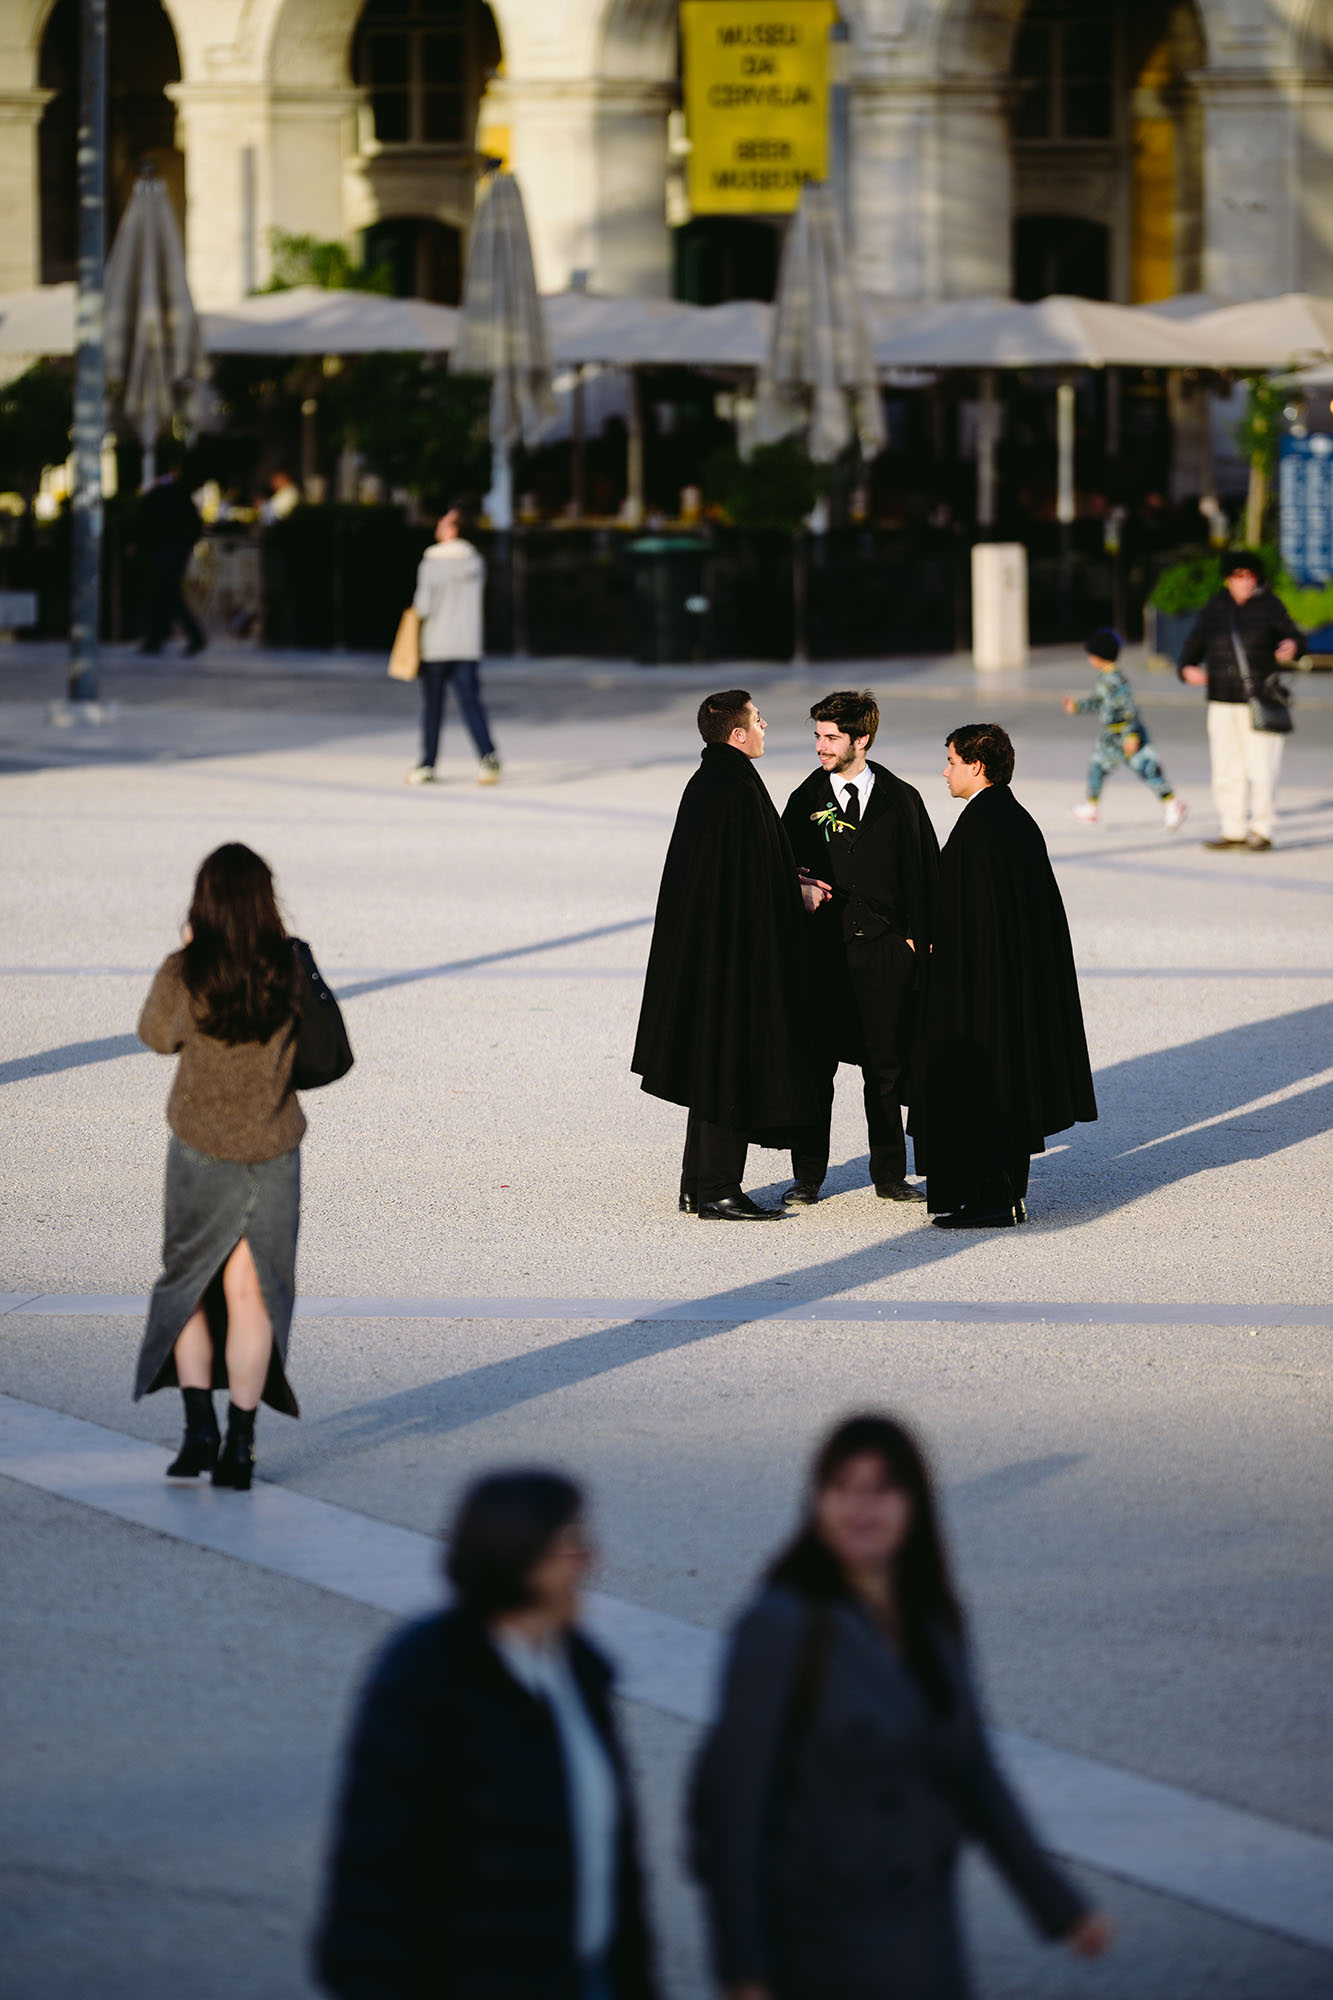 Men in black coats chatting at the Praca do Comercio in central Lisbon, Portugal